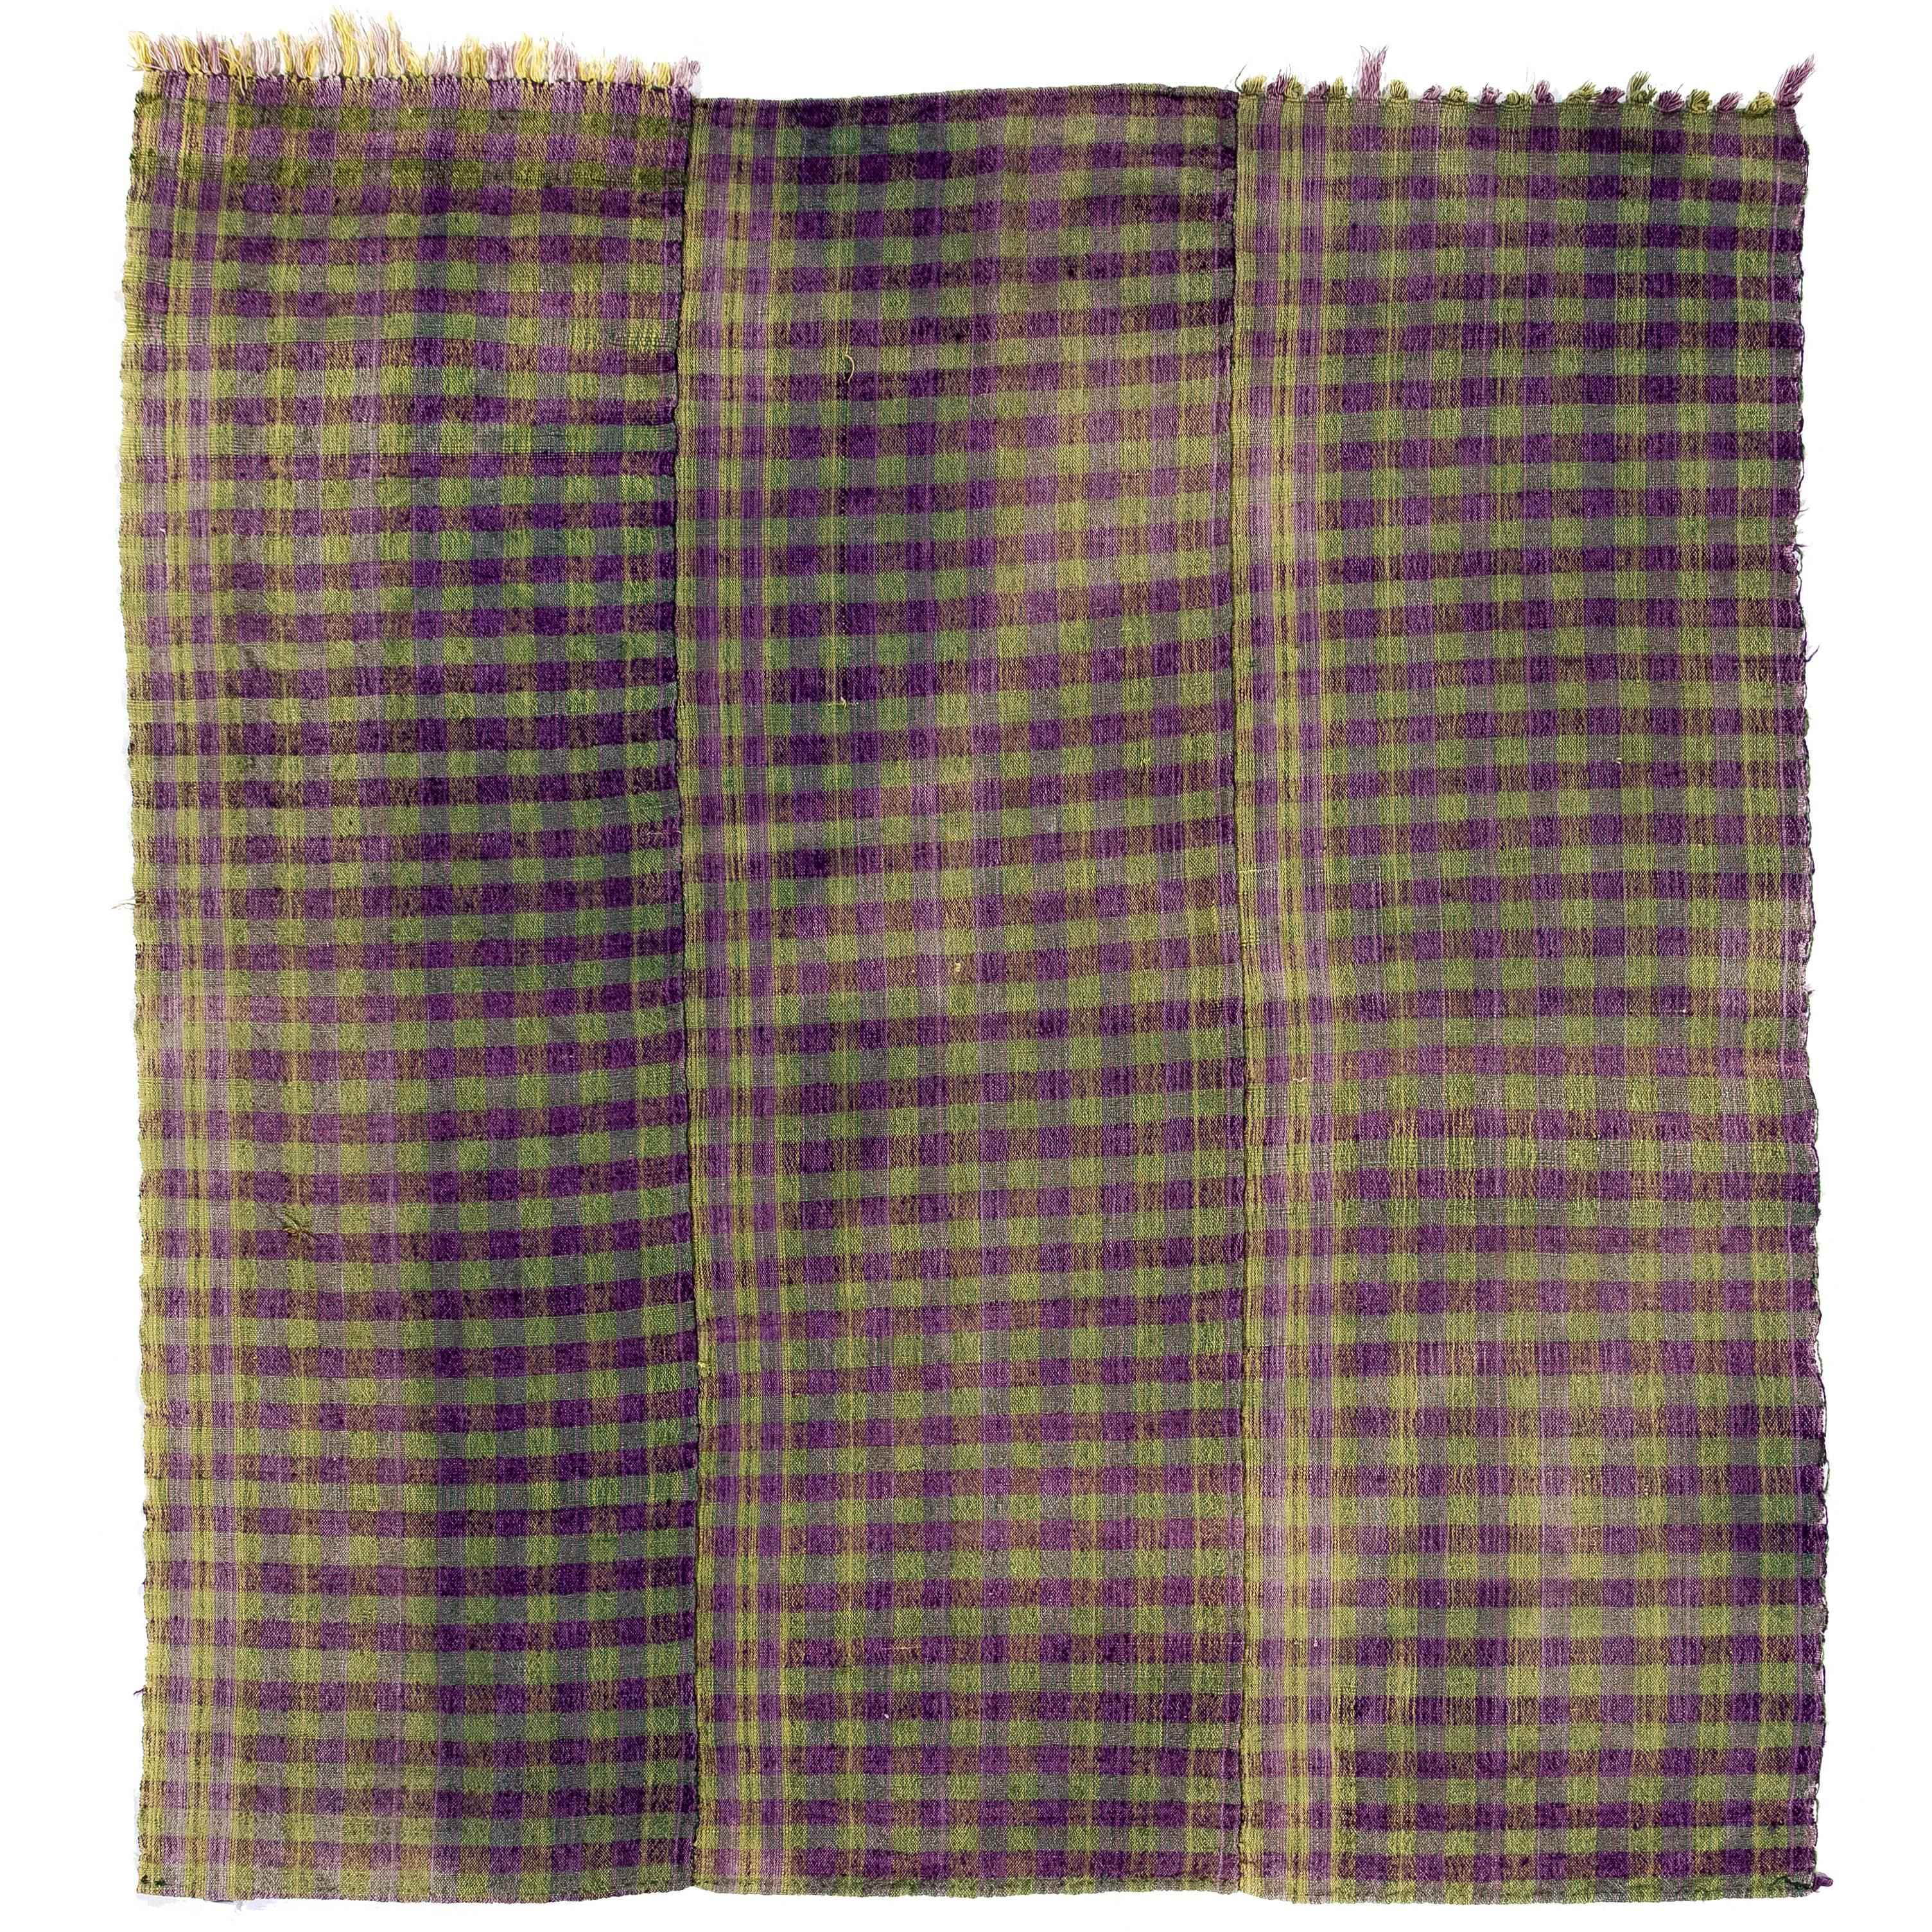 Vintage Chequered Turkish Kilim, Purple and Citrus Green Color